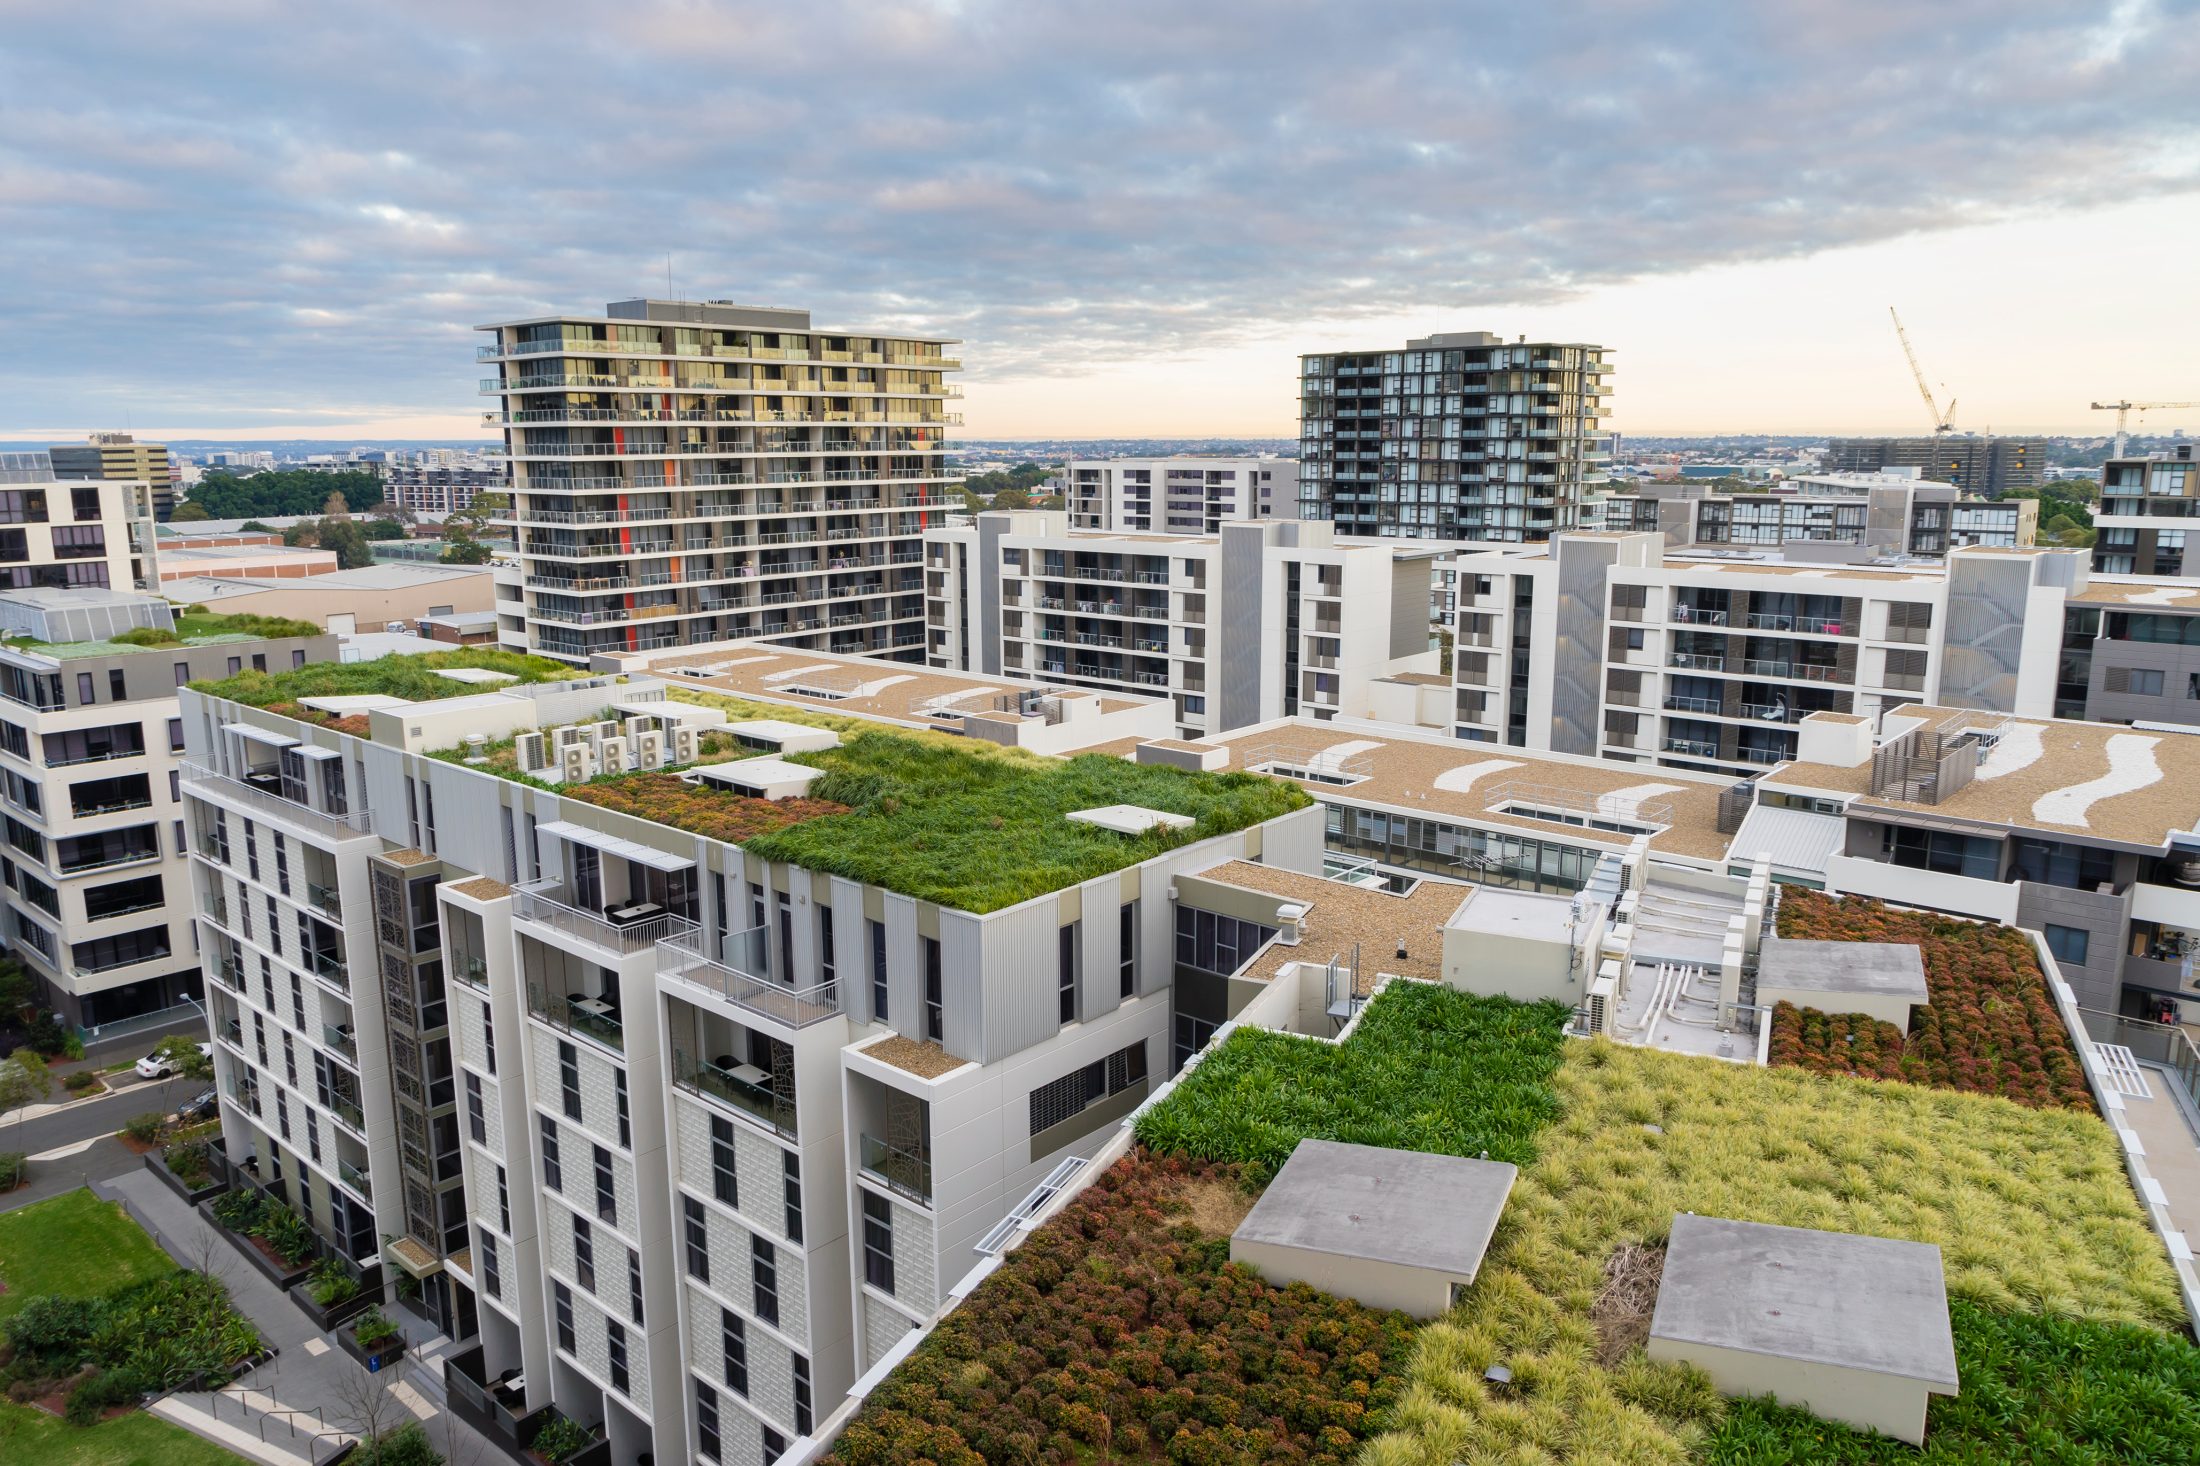 Benefits of a Green Roof